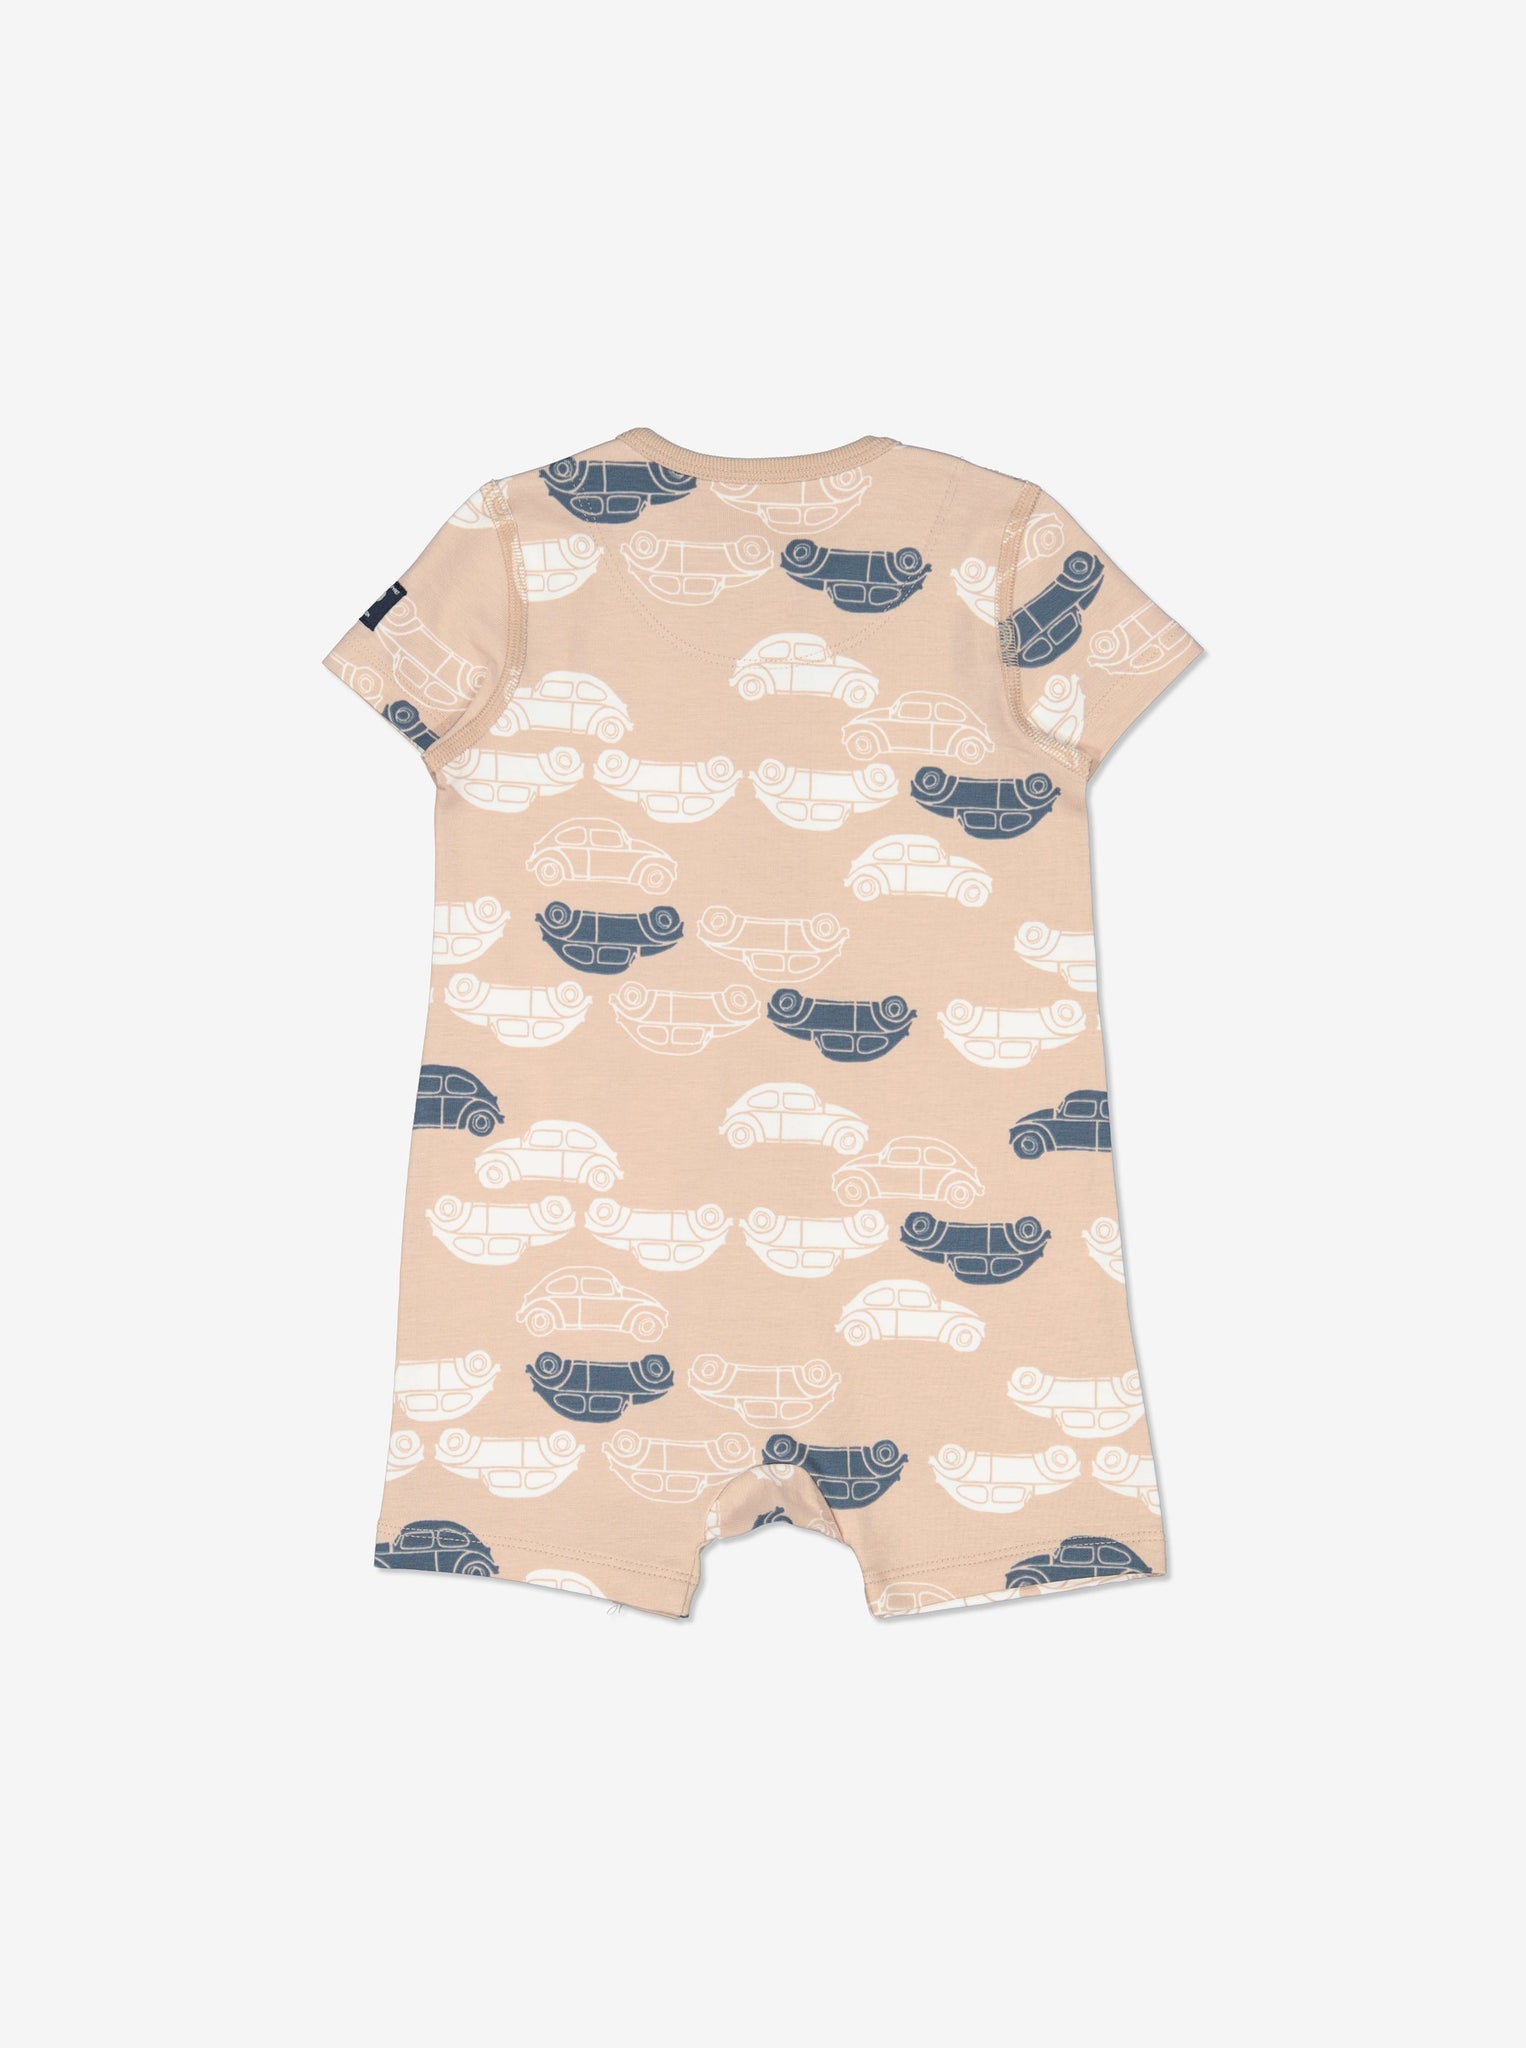  Cotton Newborn Baby All In One Pyjamas from Polarn O. Pyret Kidswear. Made Using GOTS Certified Organic Cotton